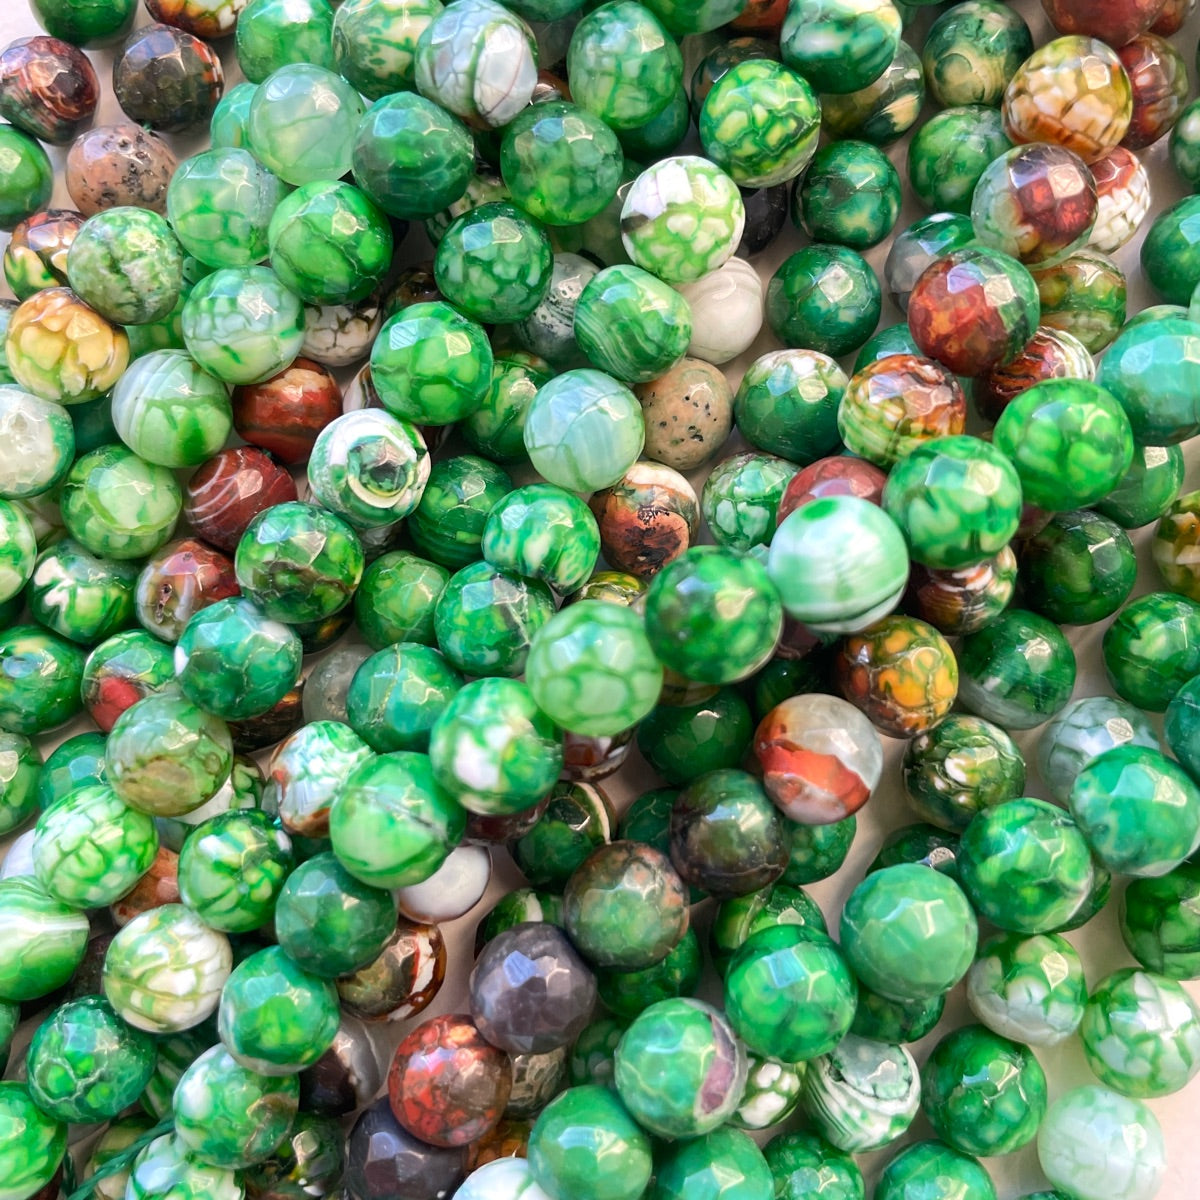 2 Strands/lot 8mm Colorful Cracked Fire Agate Faceted Stone Beads Green Stone Beads 8mm Stone Beads Faceted Agate Beads New Beads Arrivals Charms Beads Beyond